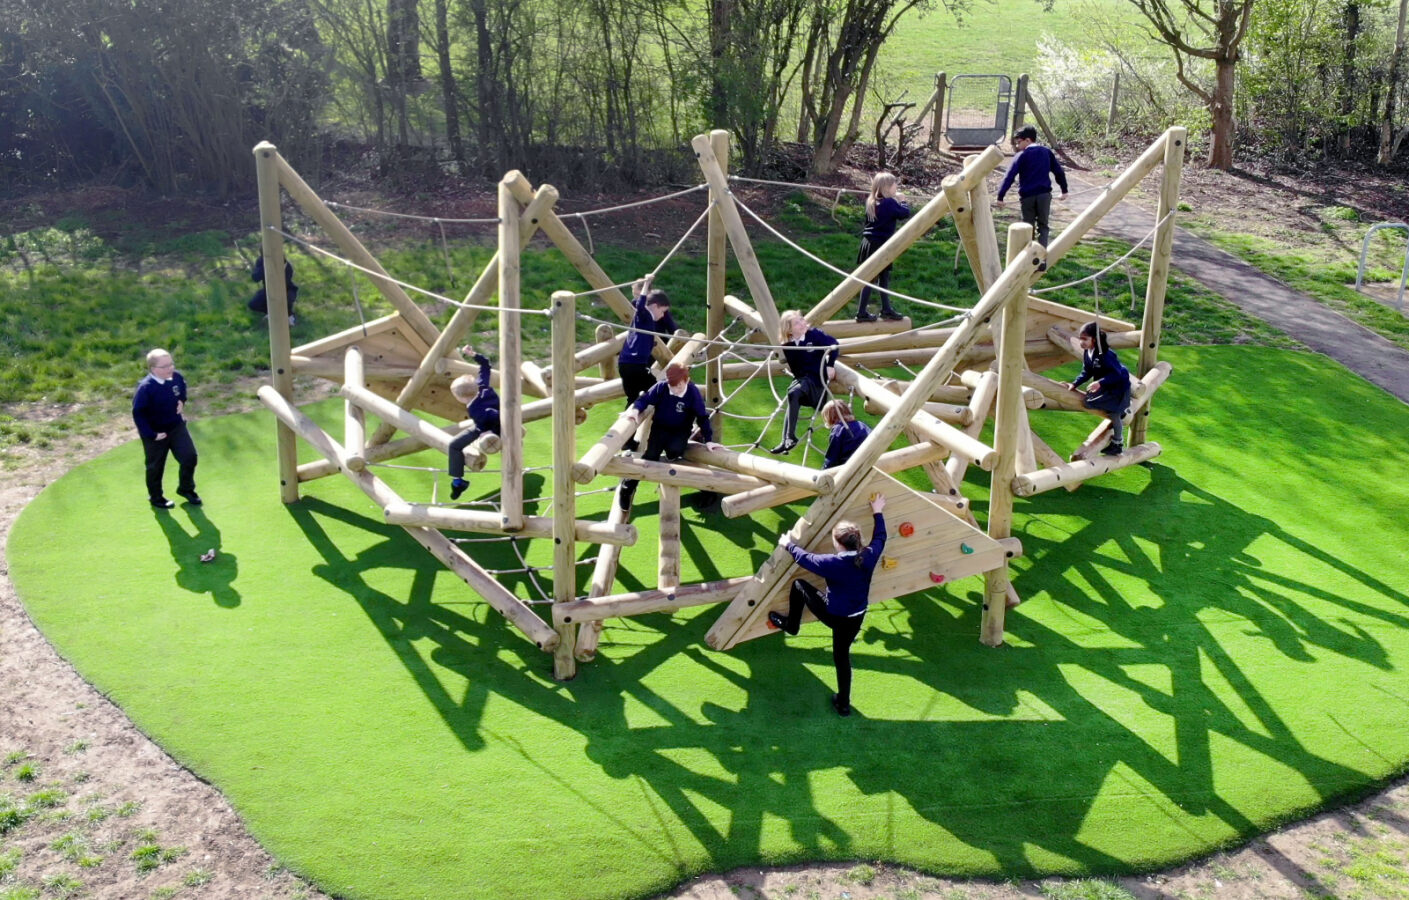 11 children playing on the Crinkle Crags Climber, a climbing frame produced by Pentagon Play.